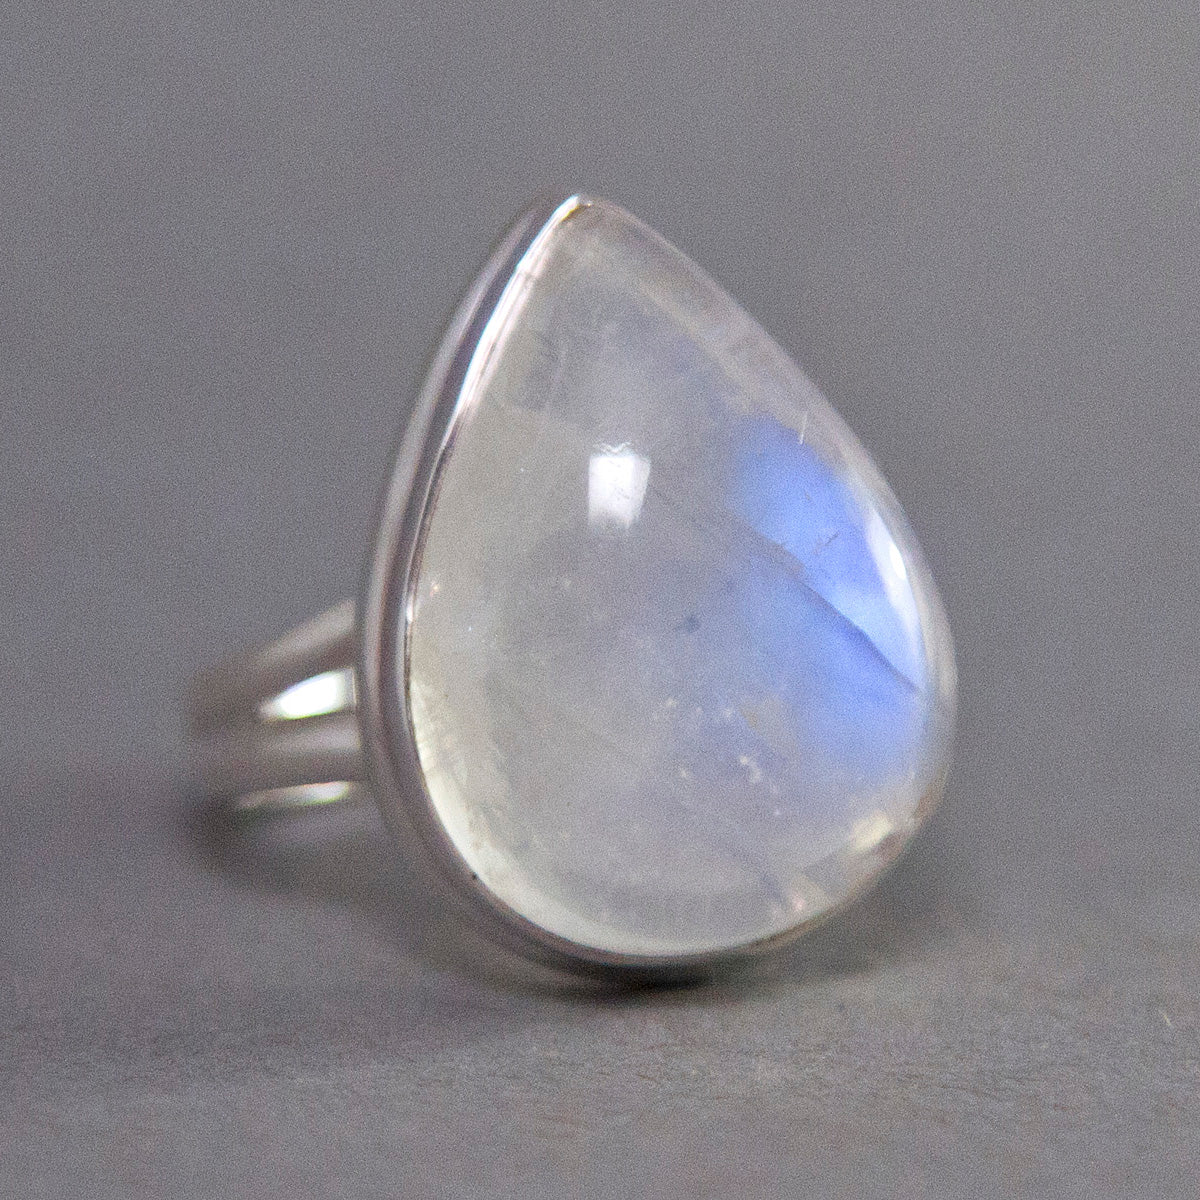 Rainbow Moonstone Teardrop Classic Sterling Silver Ring US 7.5 SS-035